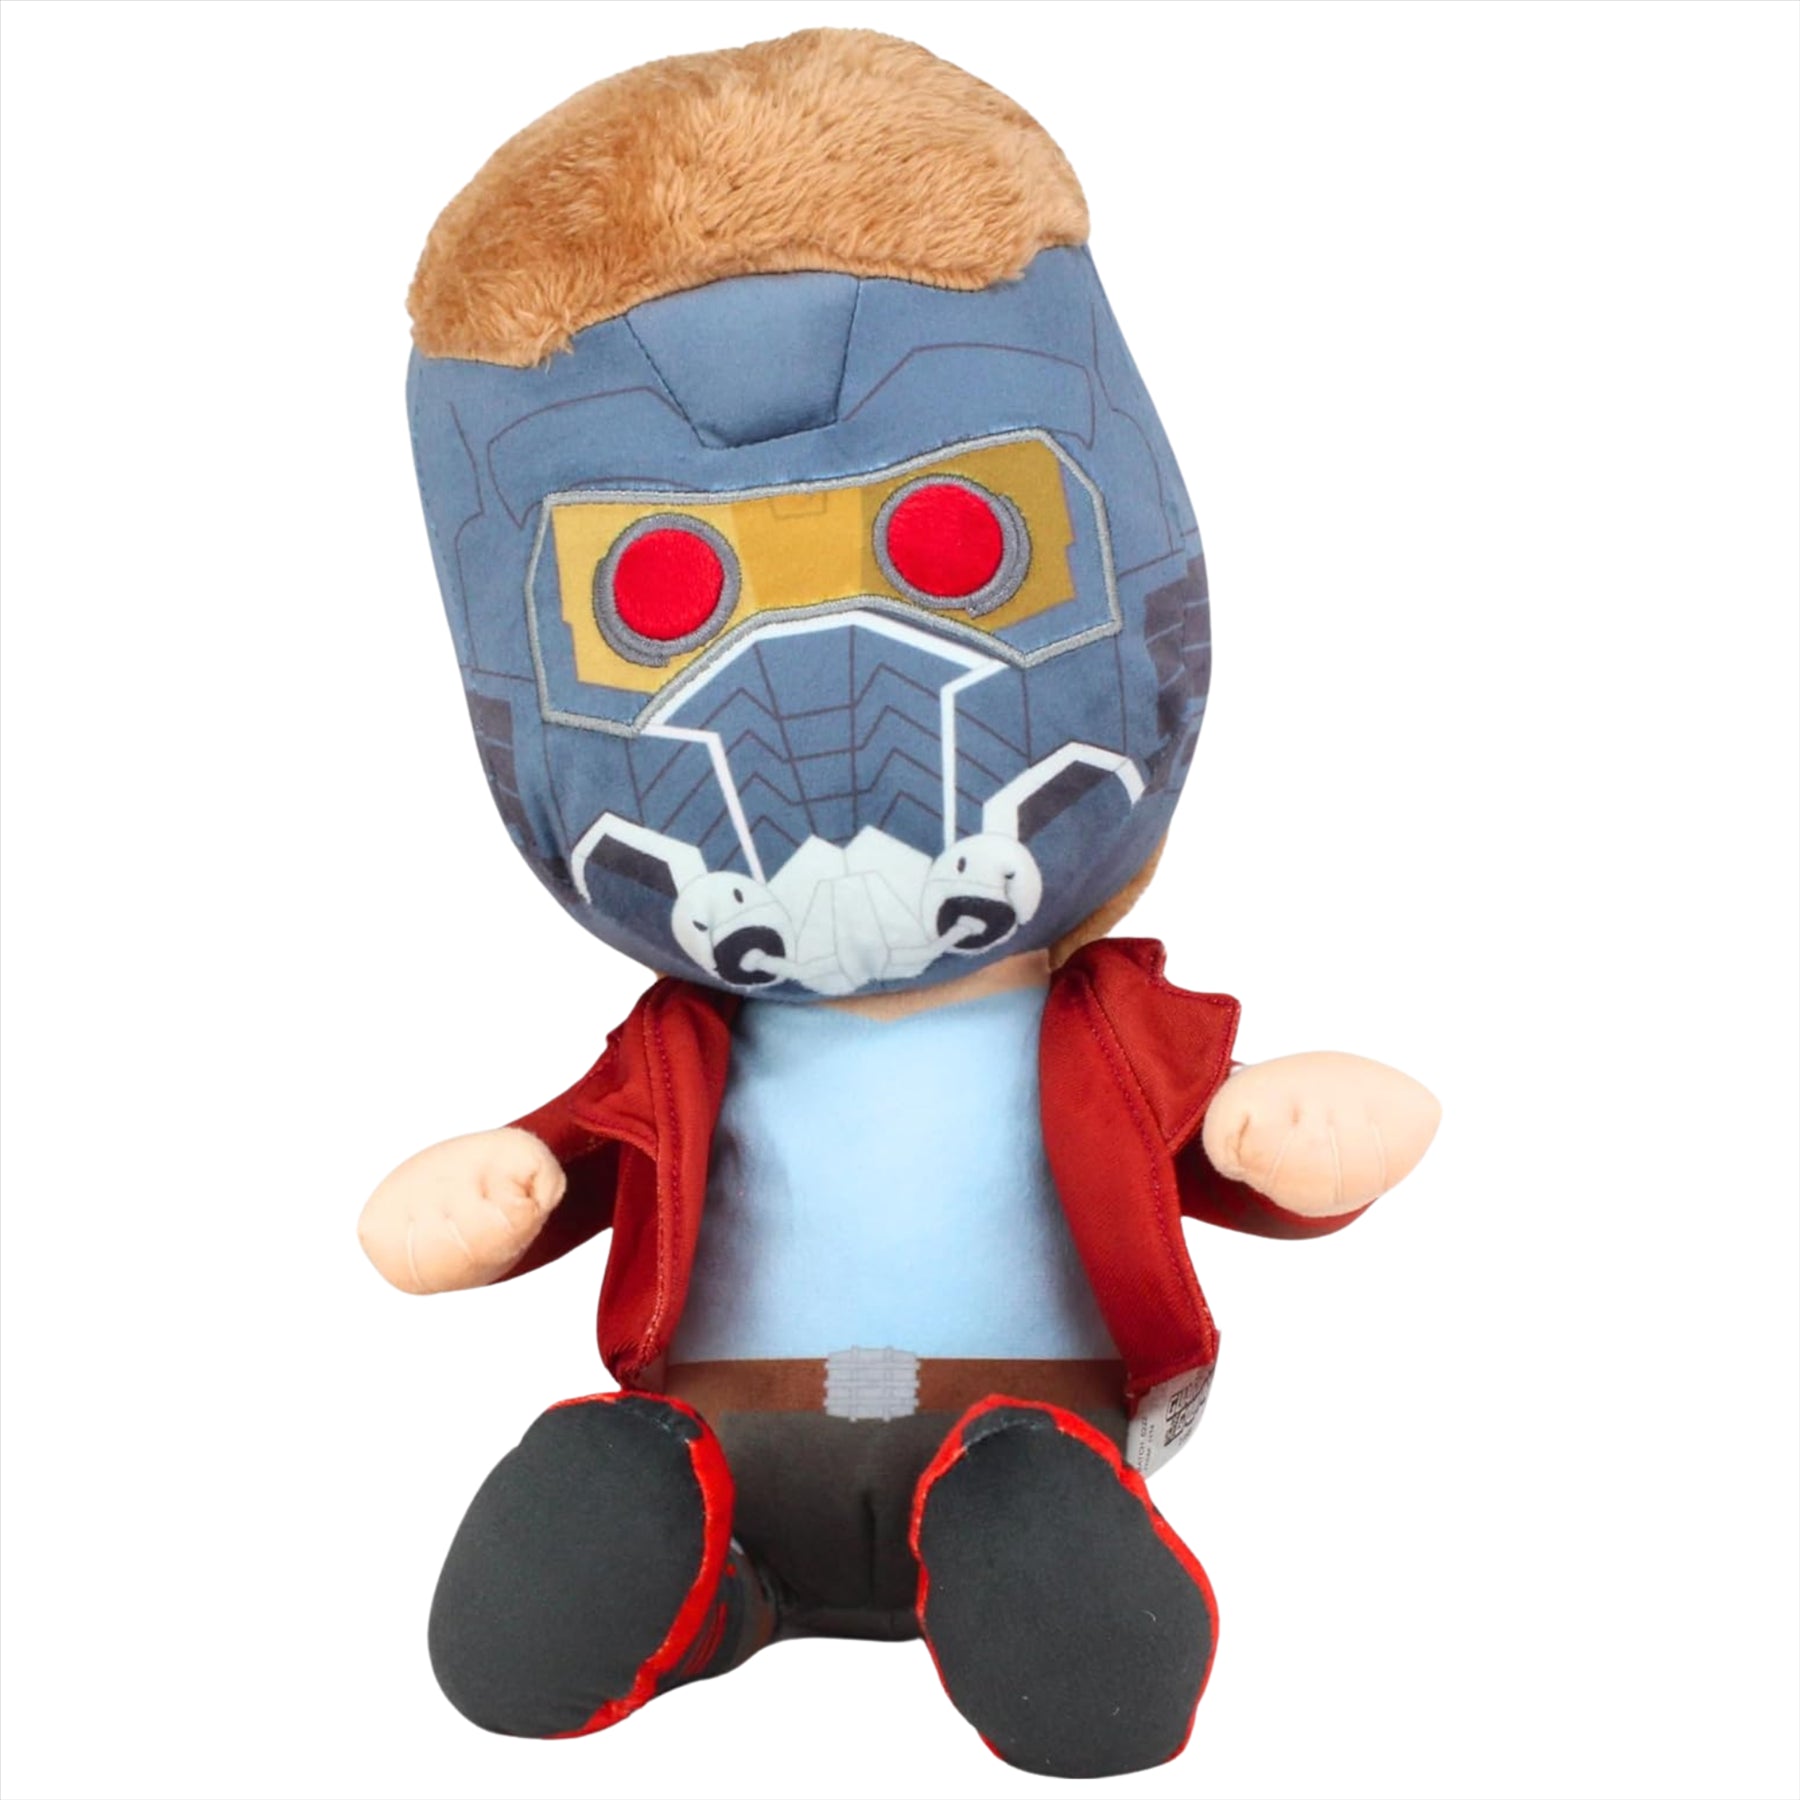 Guardians of the Galaxy Avengers Starlord Super Soft Embroidered 36cm Plush Toy - Toptoys2u